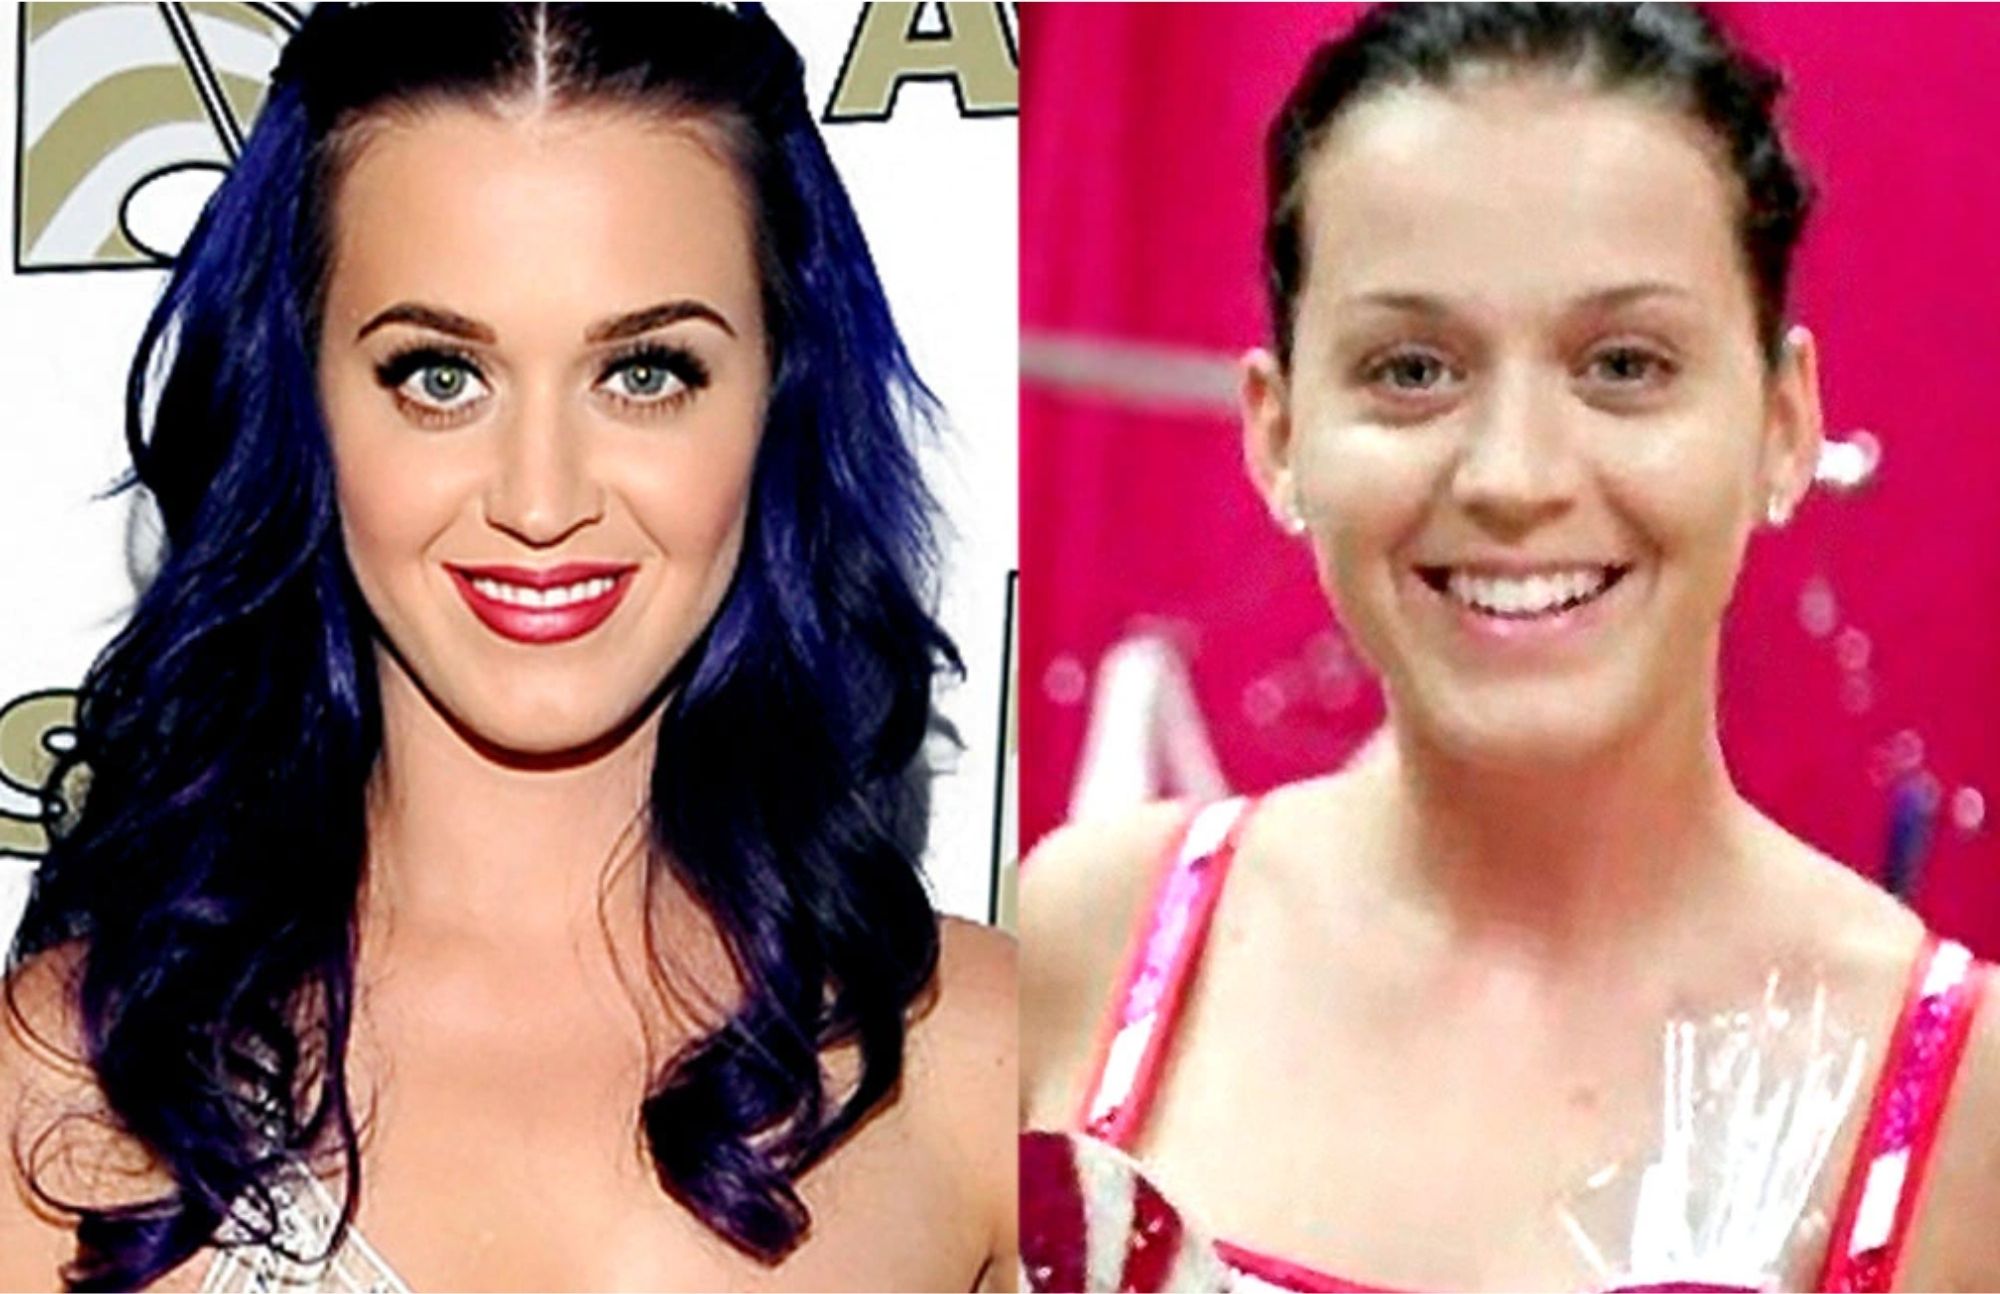 Katy Perry wearing red lipstick and a blue hair extension, and Katy Perry without makeup